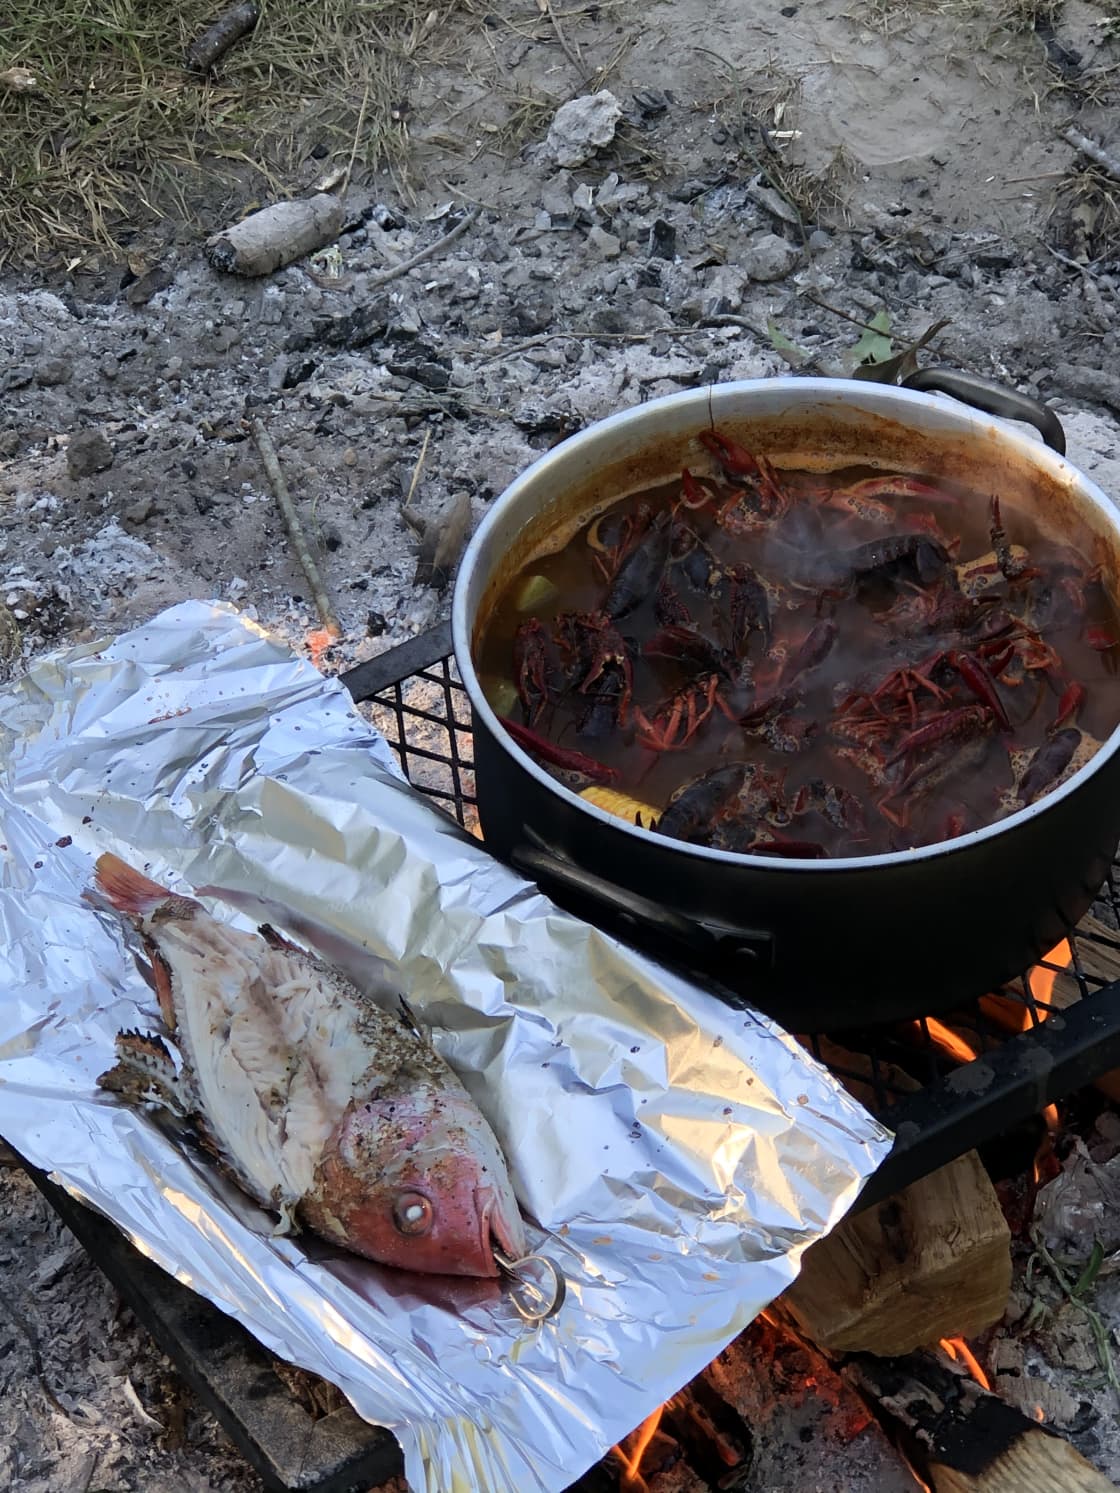 Red snapper and shrimp and crawfish boil